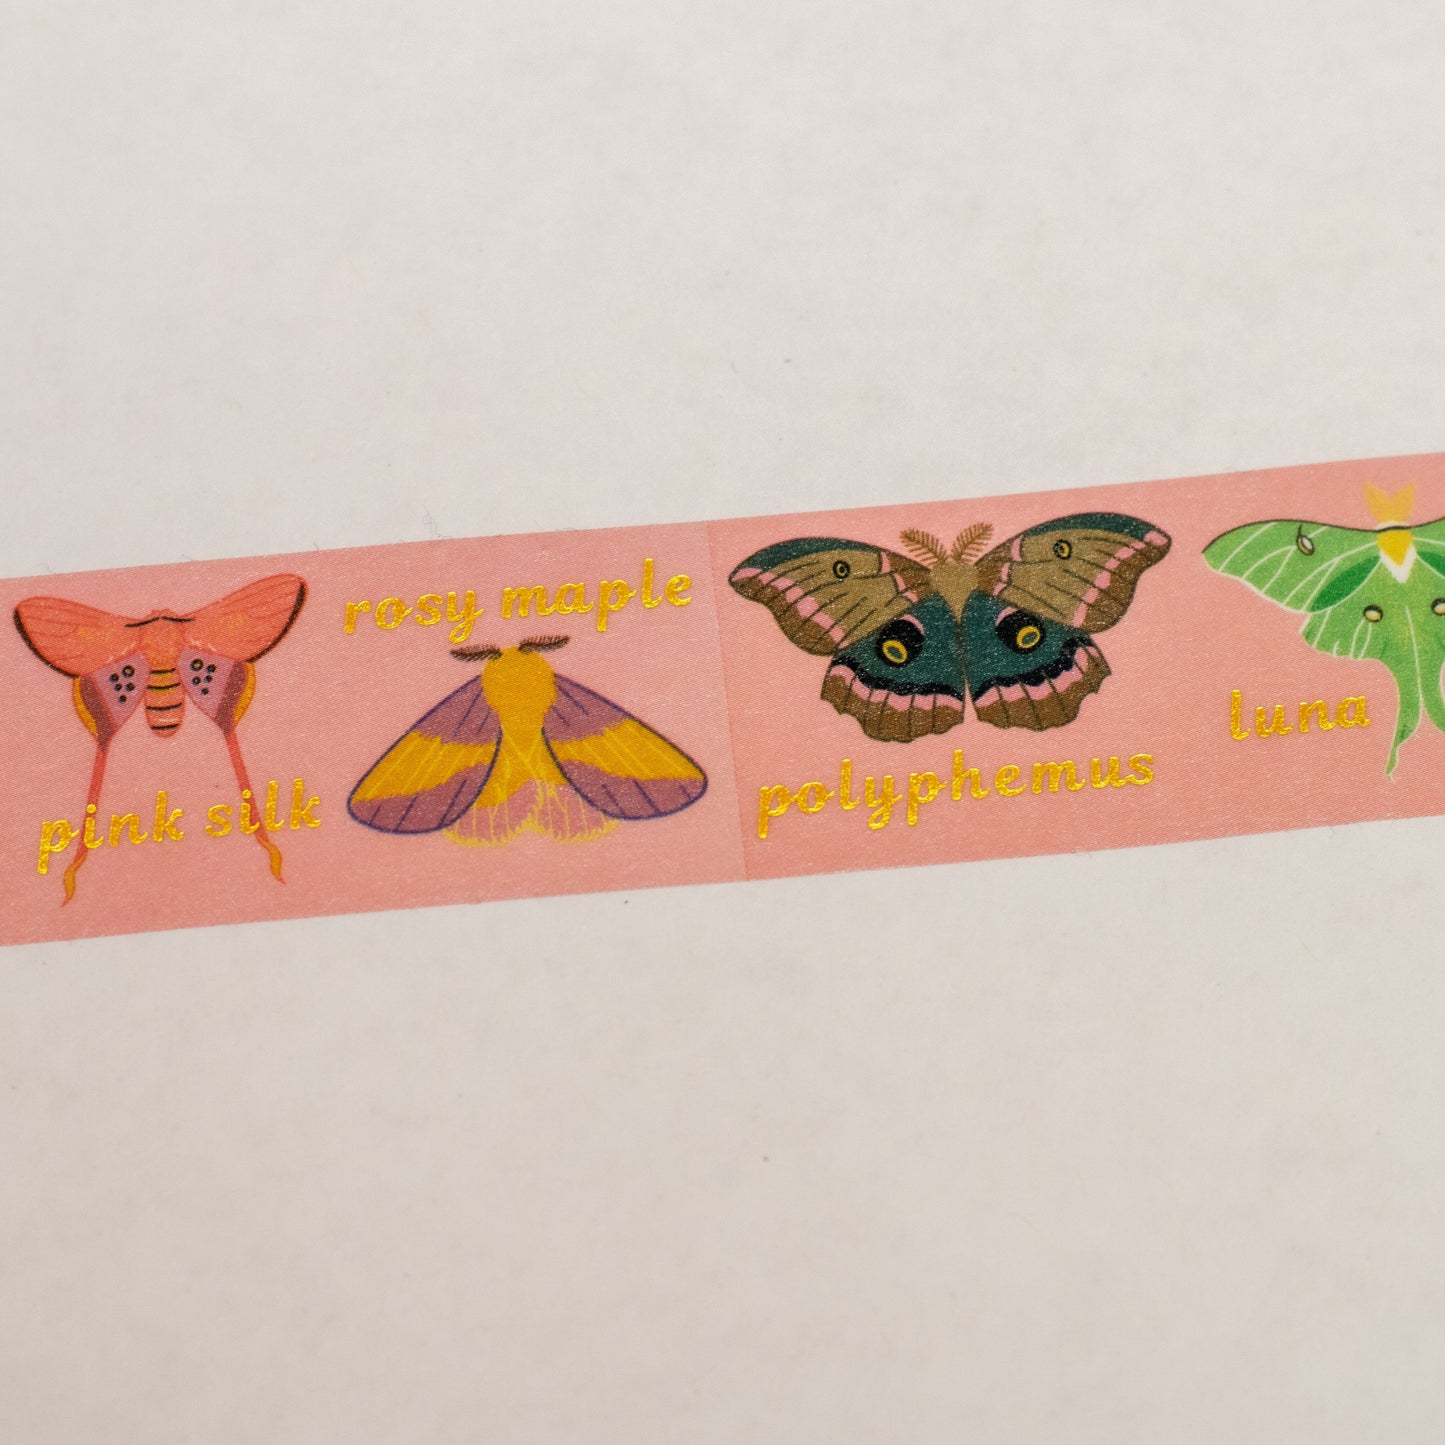 Goth and Pastel Moths Washi Tape!